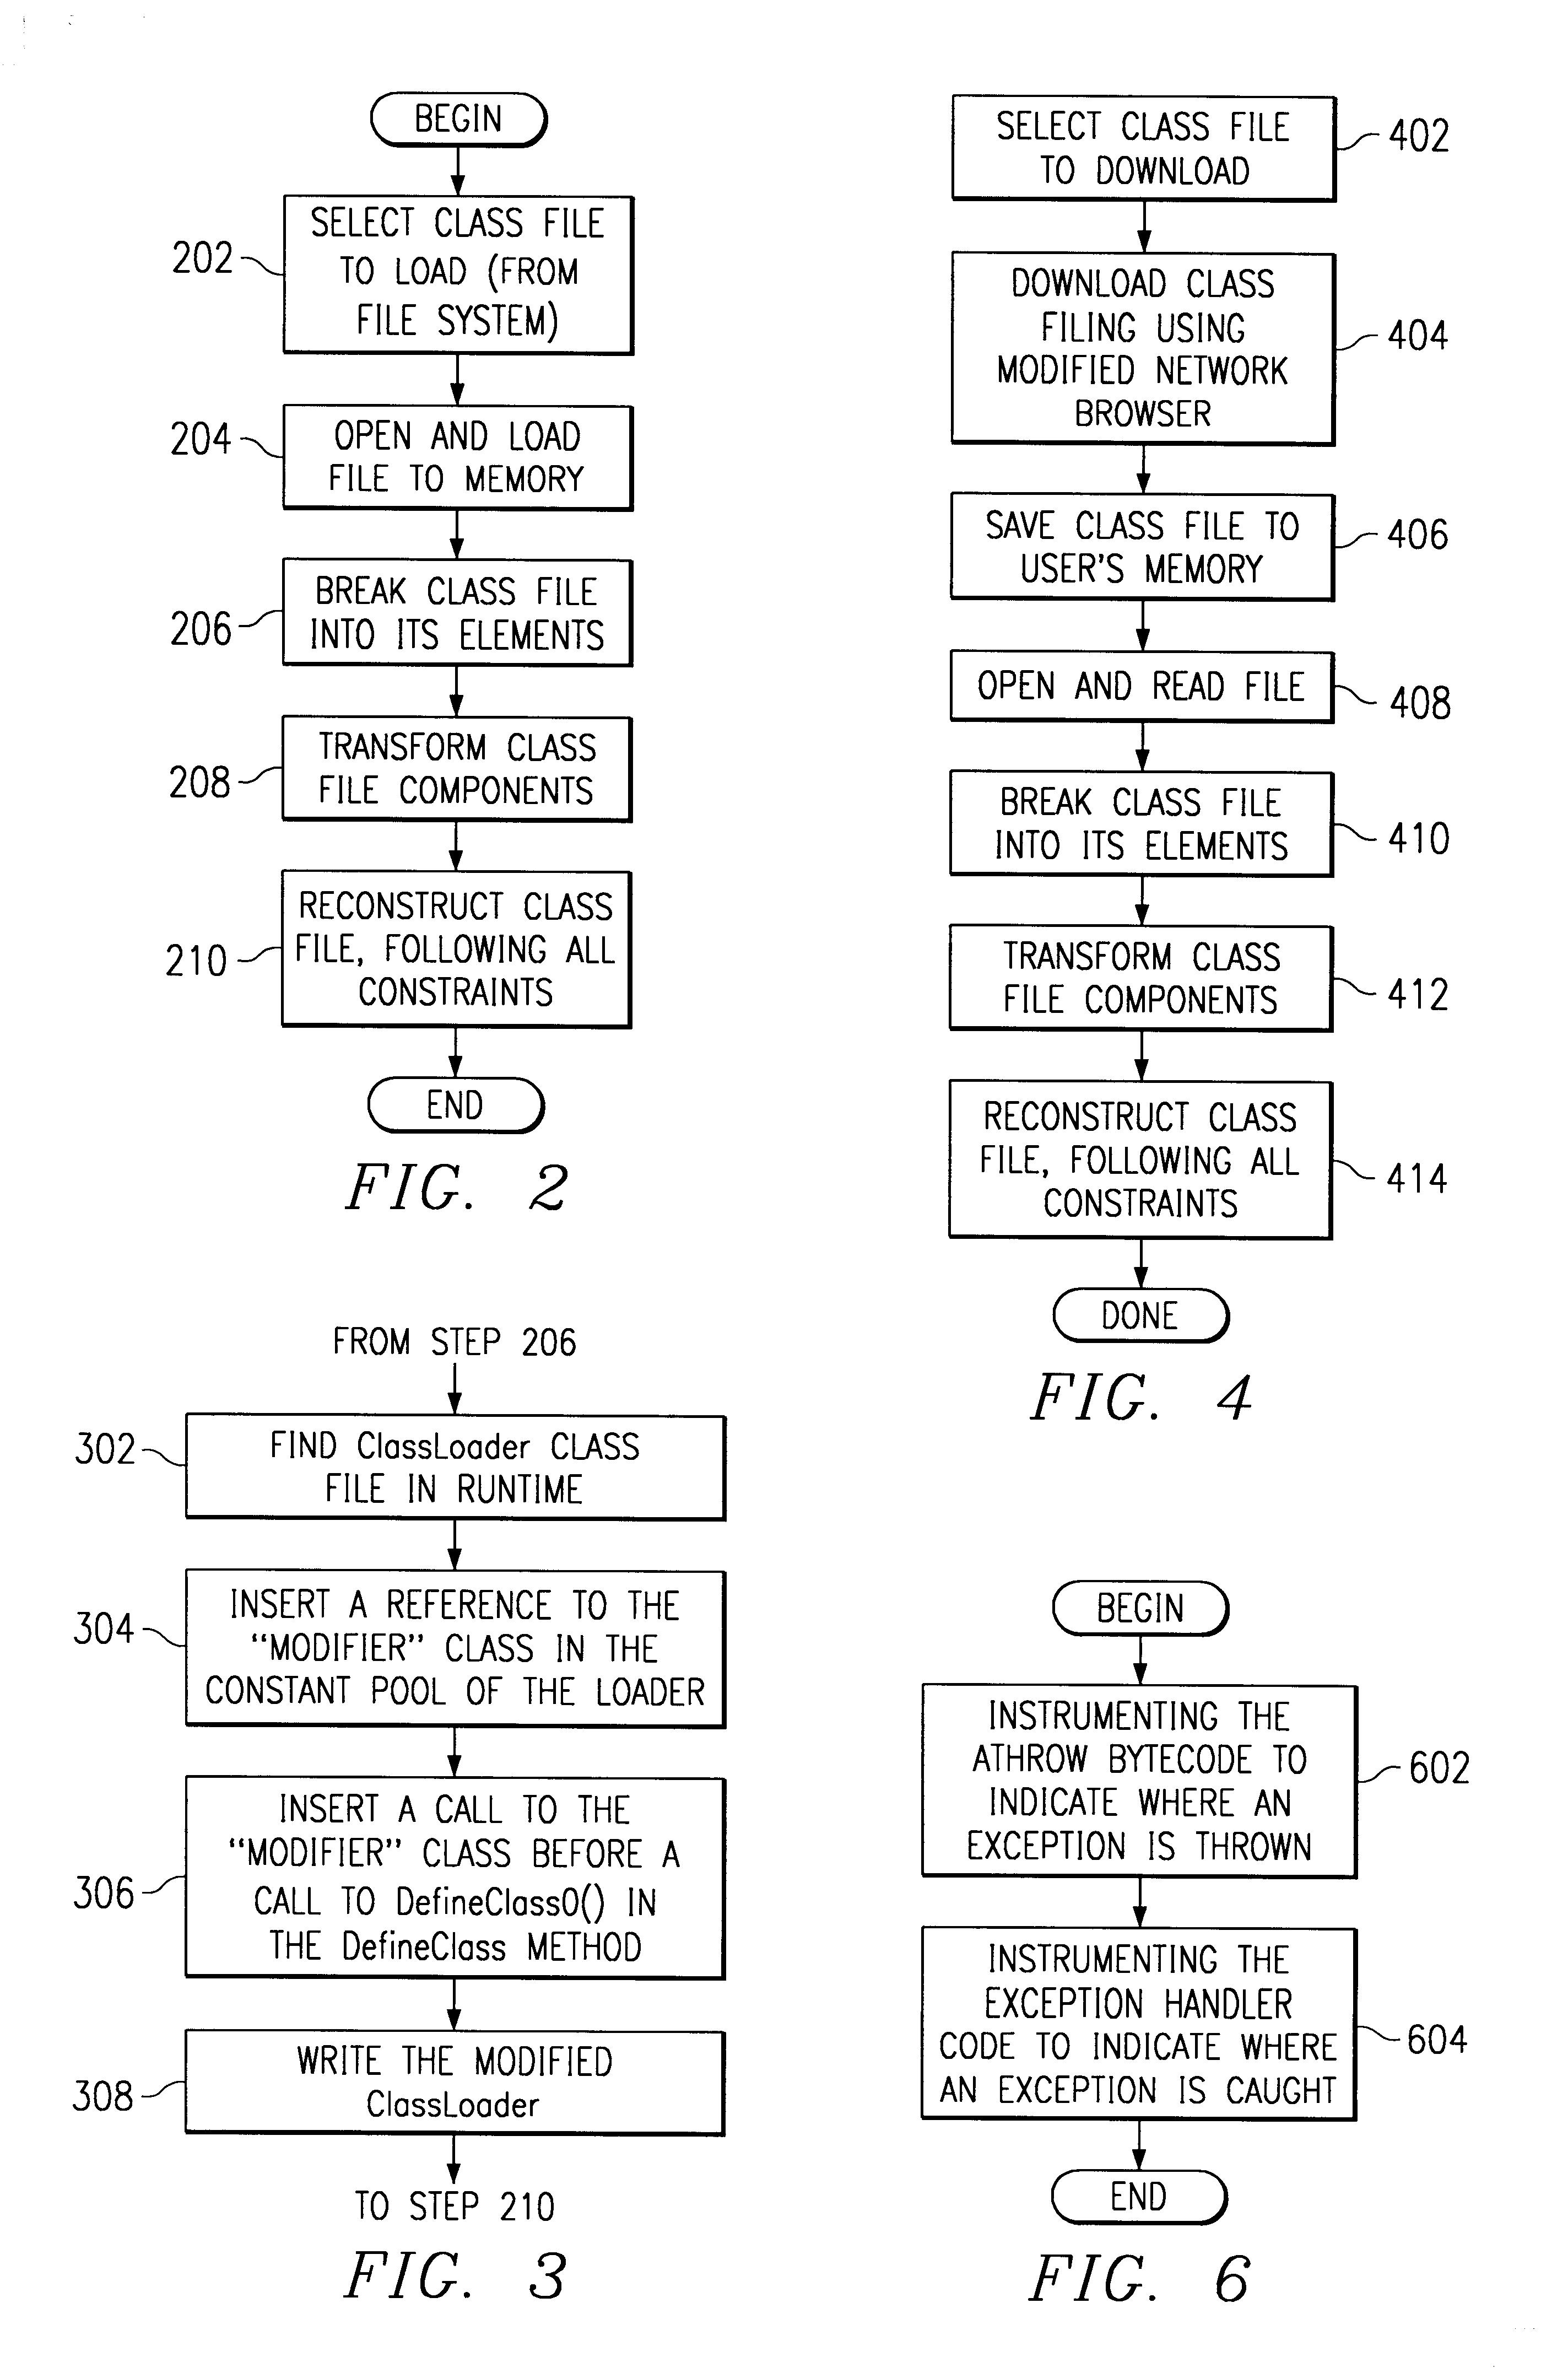 System and method for injecting hooks into Java classes to handle exception and finalization processing